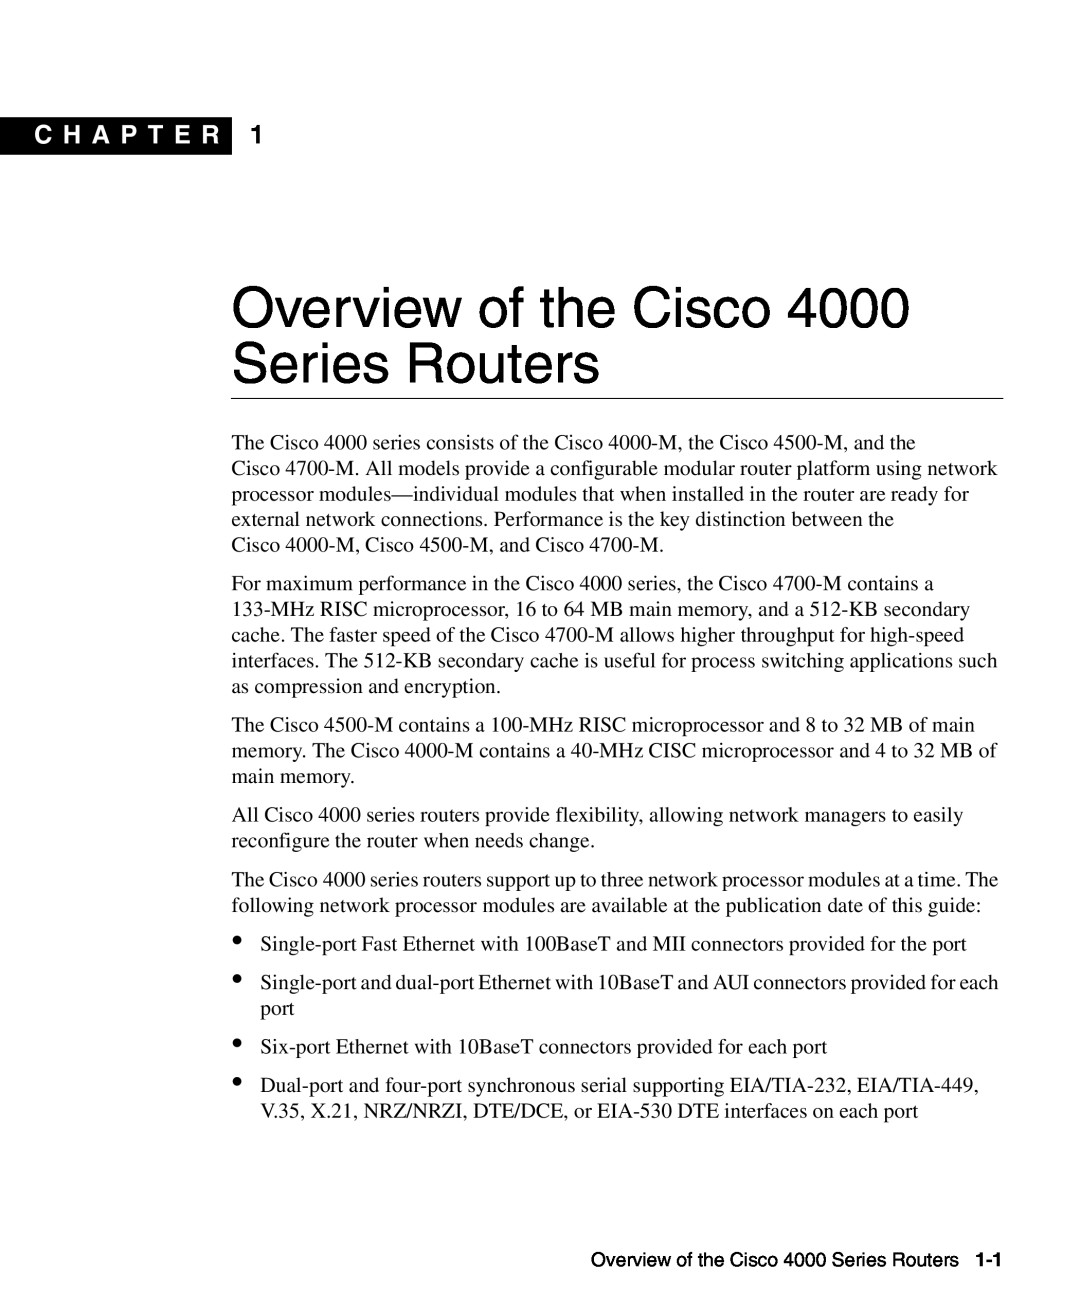 Cisco Systems appendix Safety Recommendations, Preparing to Install Cisco 4000 Series Routers, C H A P T E R 